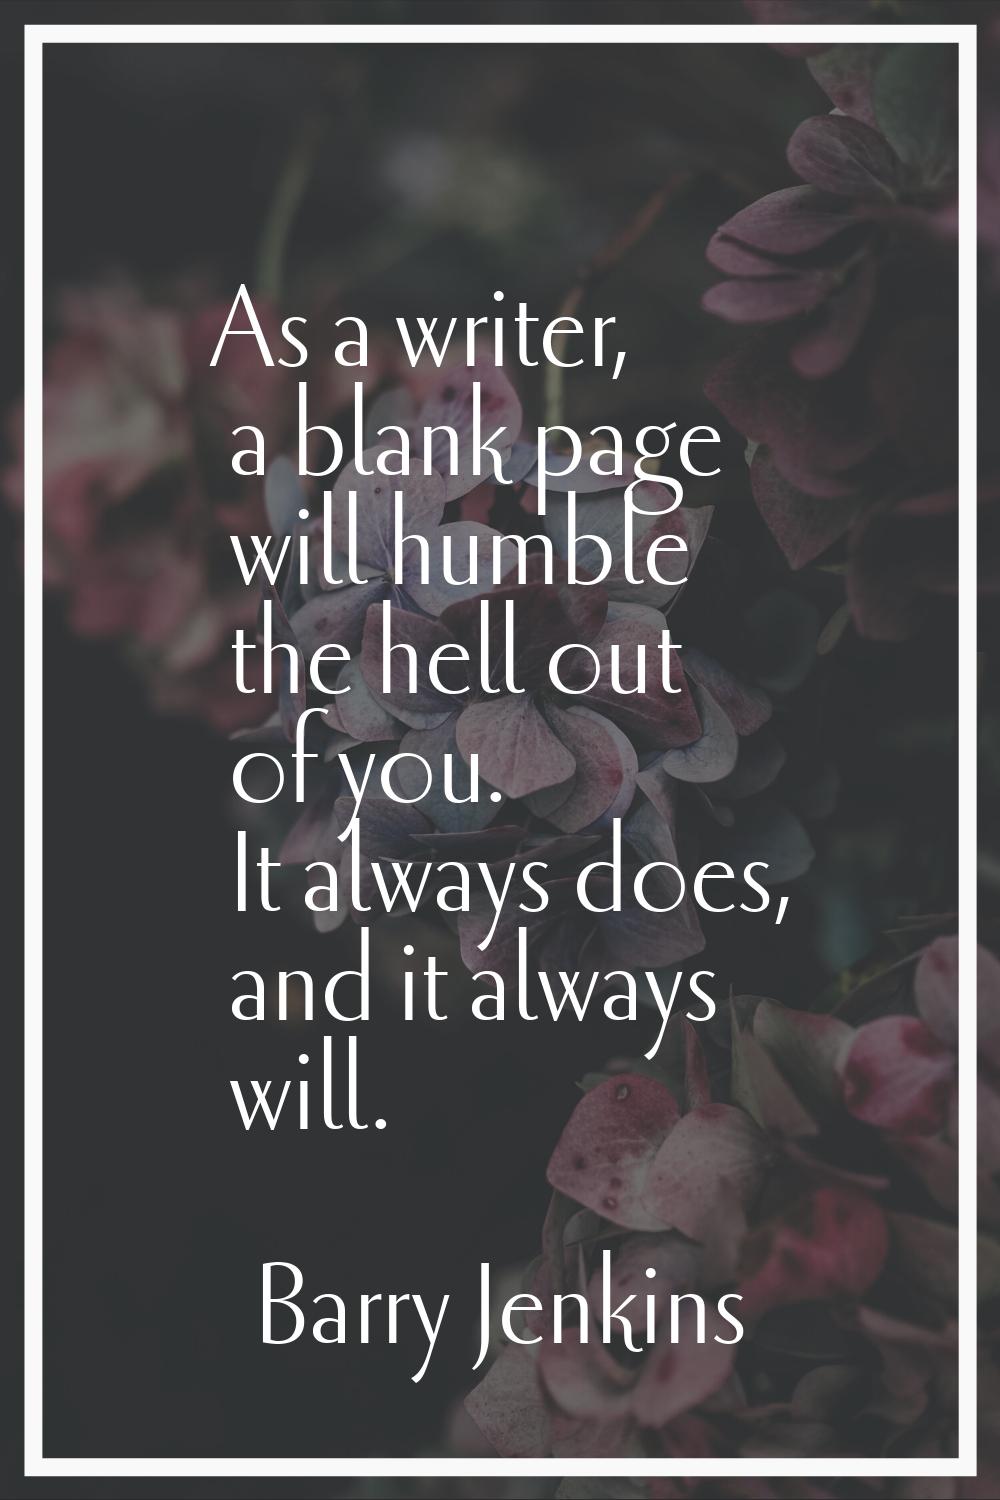 As a writer, a blank page will humble the hell out of you. It always does, and it always will.